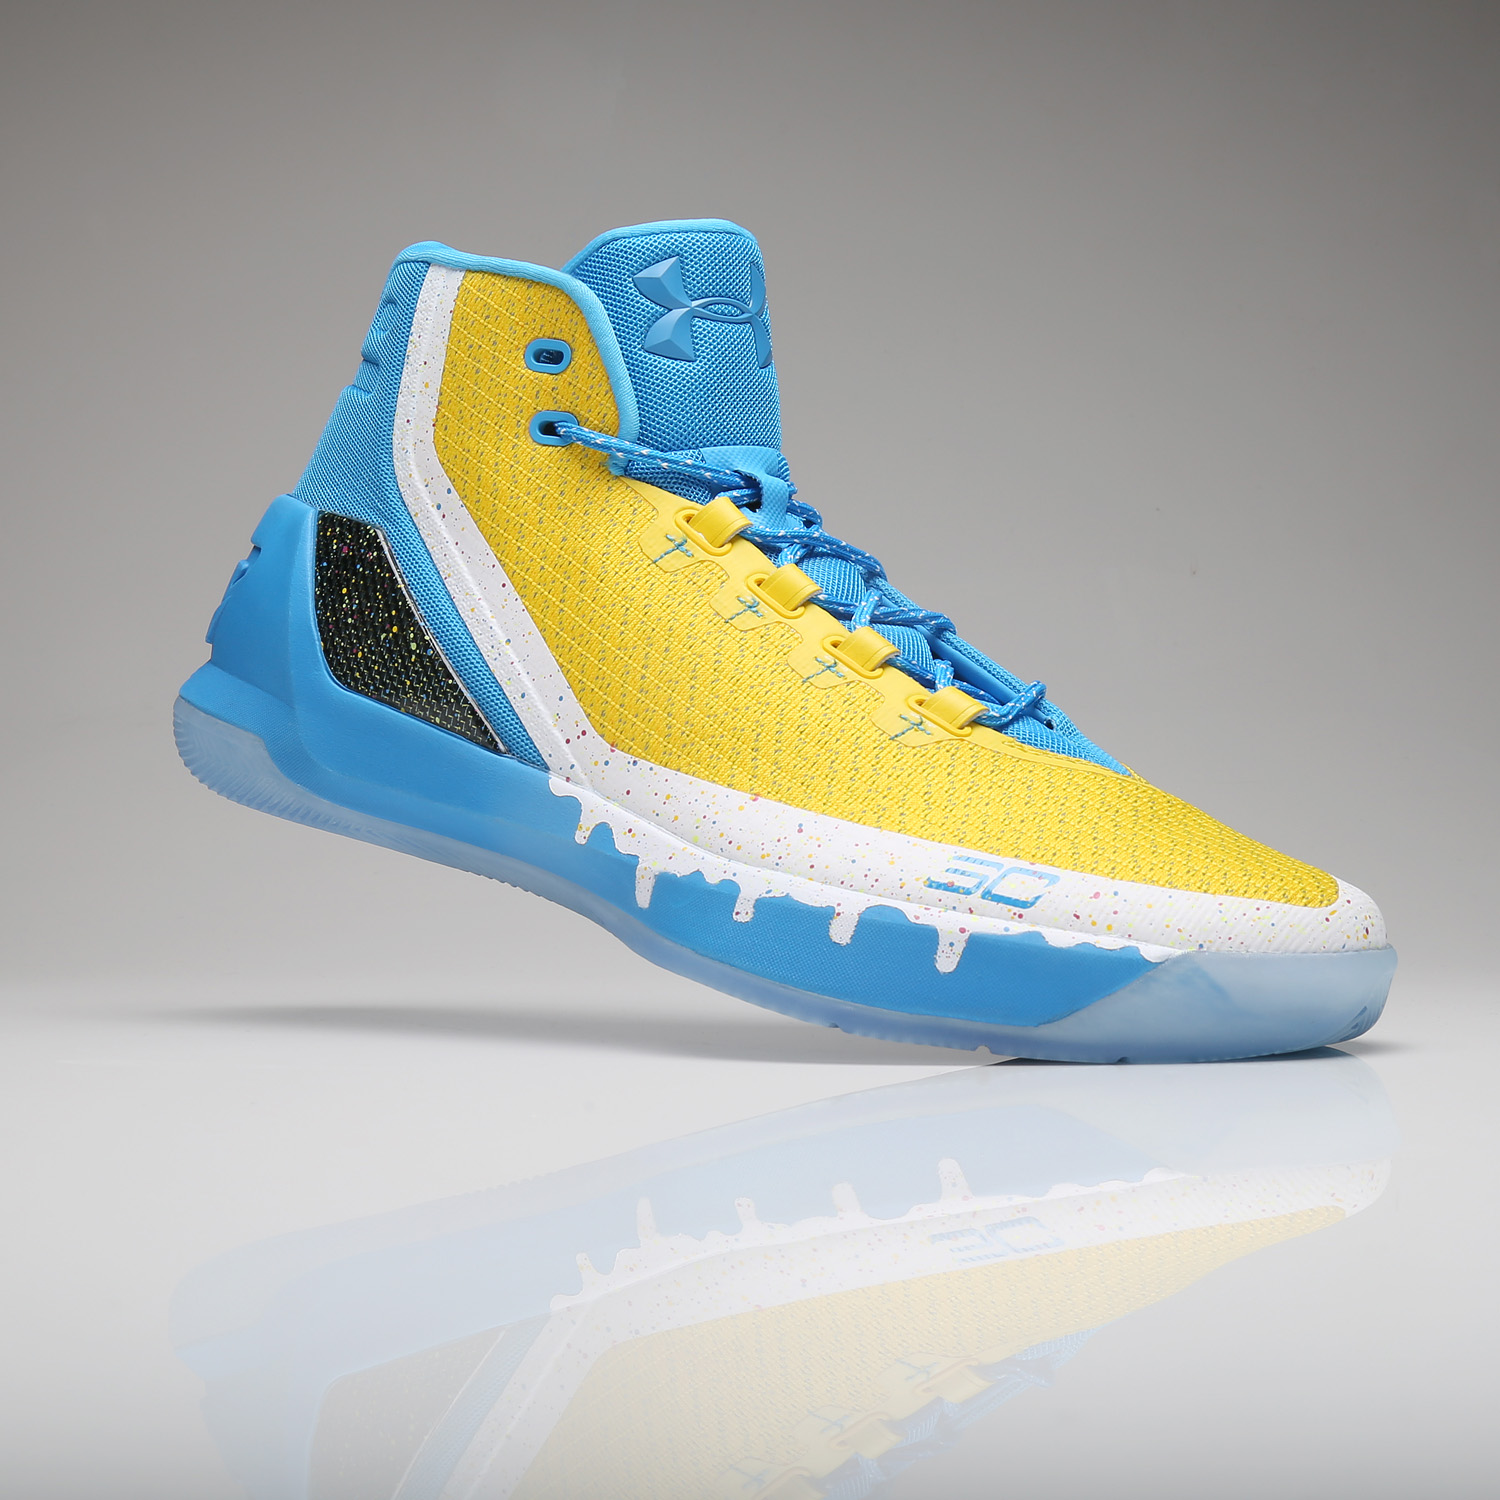 Steph Curry wears his much maligned new shoes with 'straight (fire 